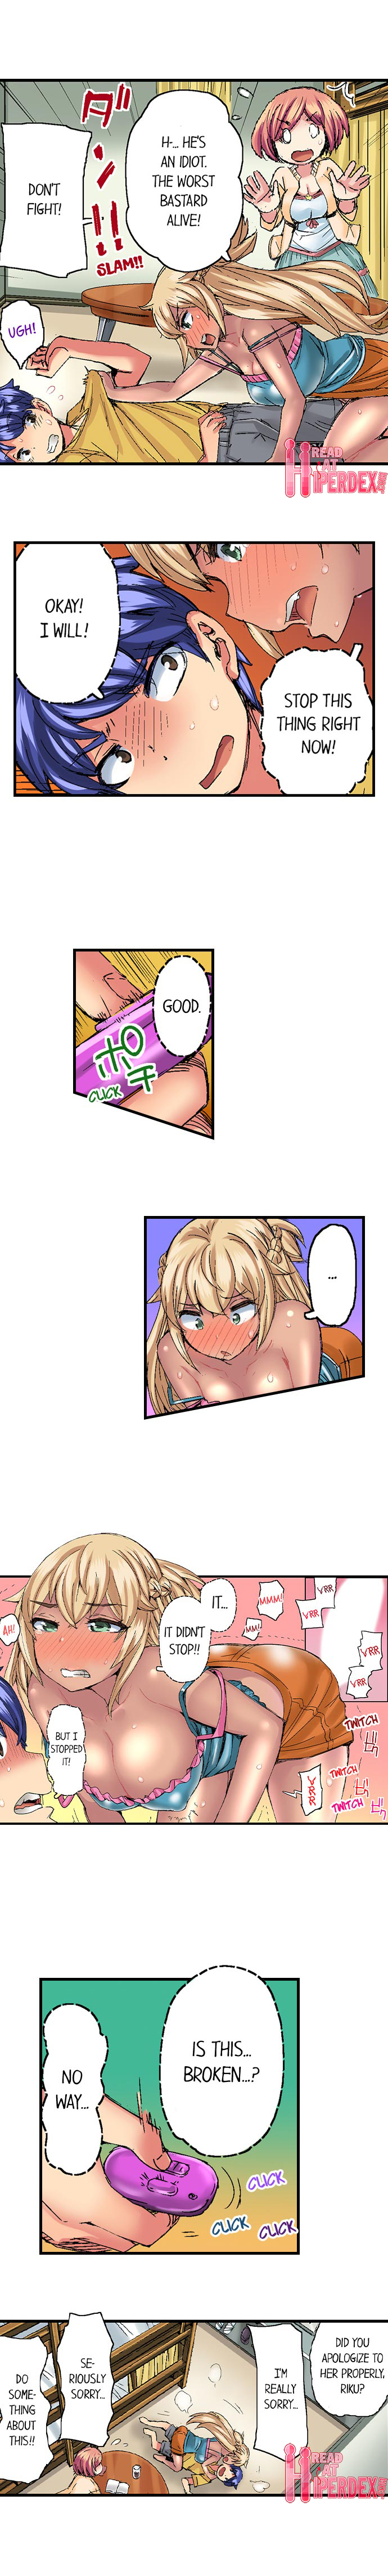 Taking a Hot Tanned Chick’s Virginity - Chapter 19 Page 8